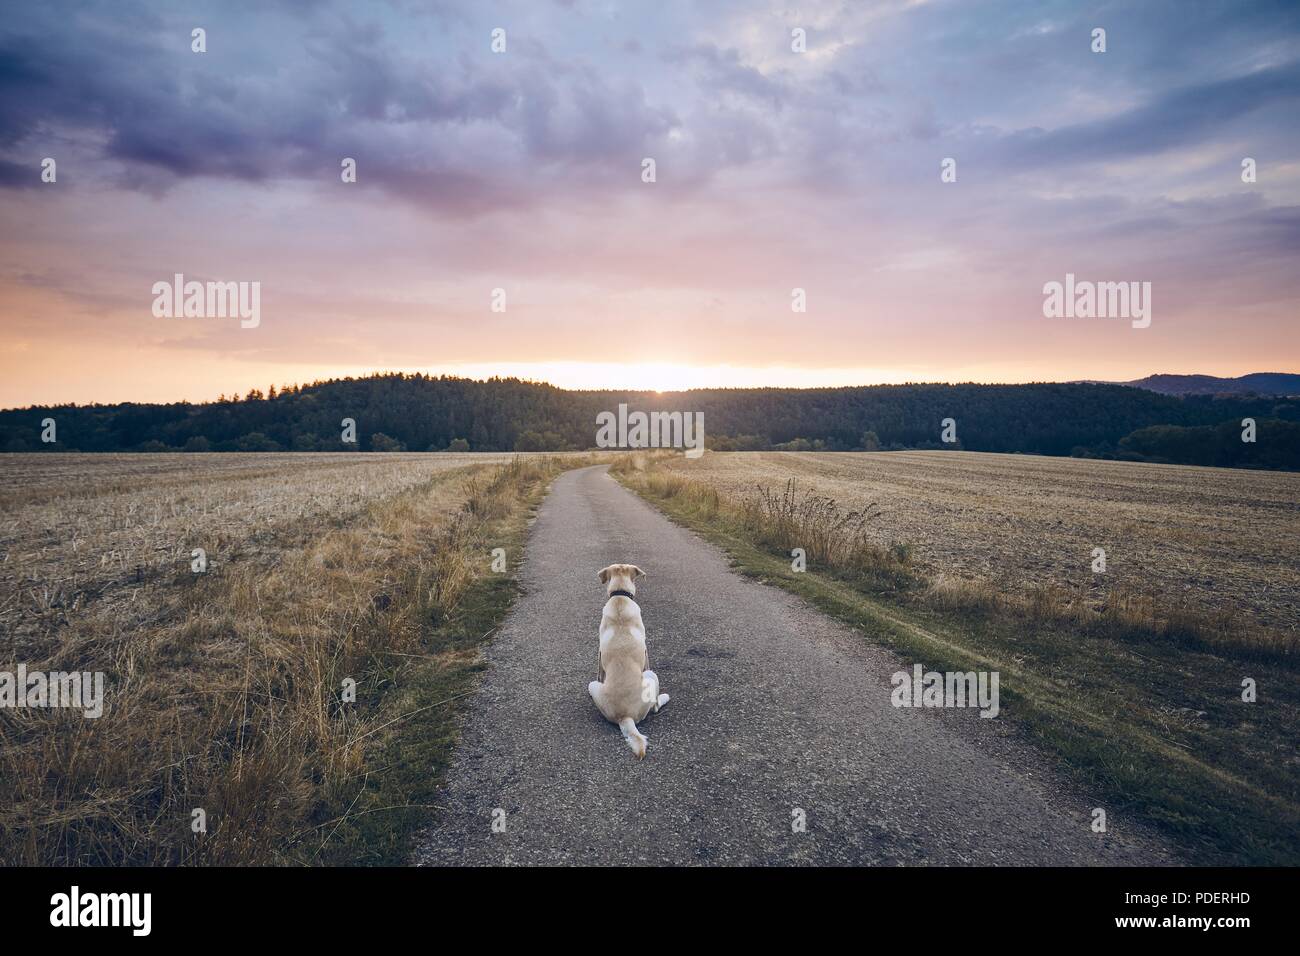 Rear view of the sad dog. Loyal labrador retriever waiting on the rural road at sunset. Stock Photo